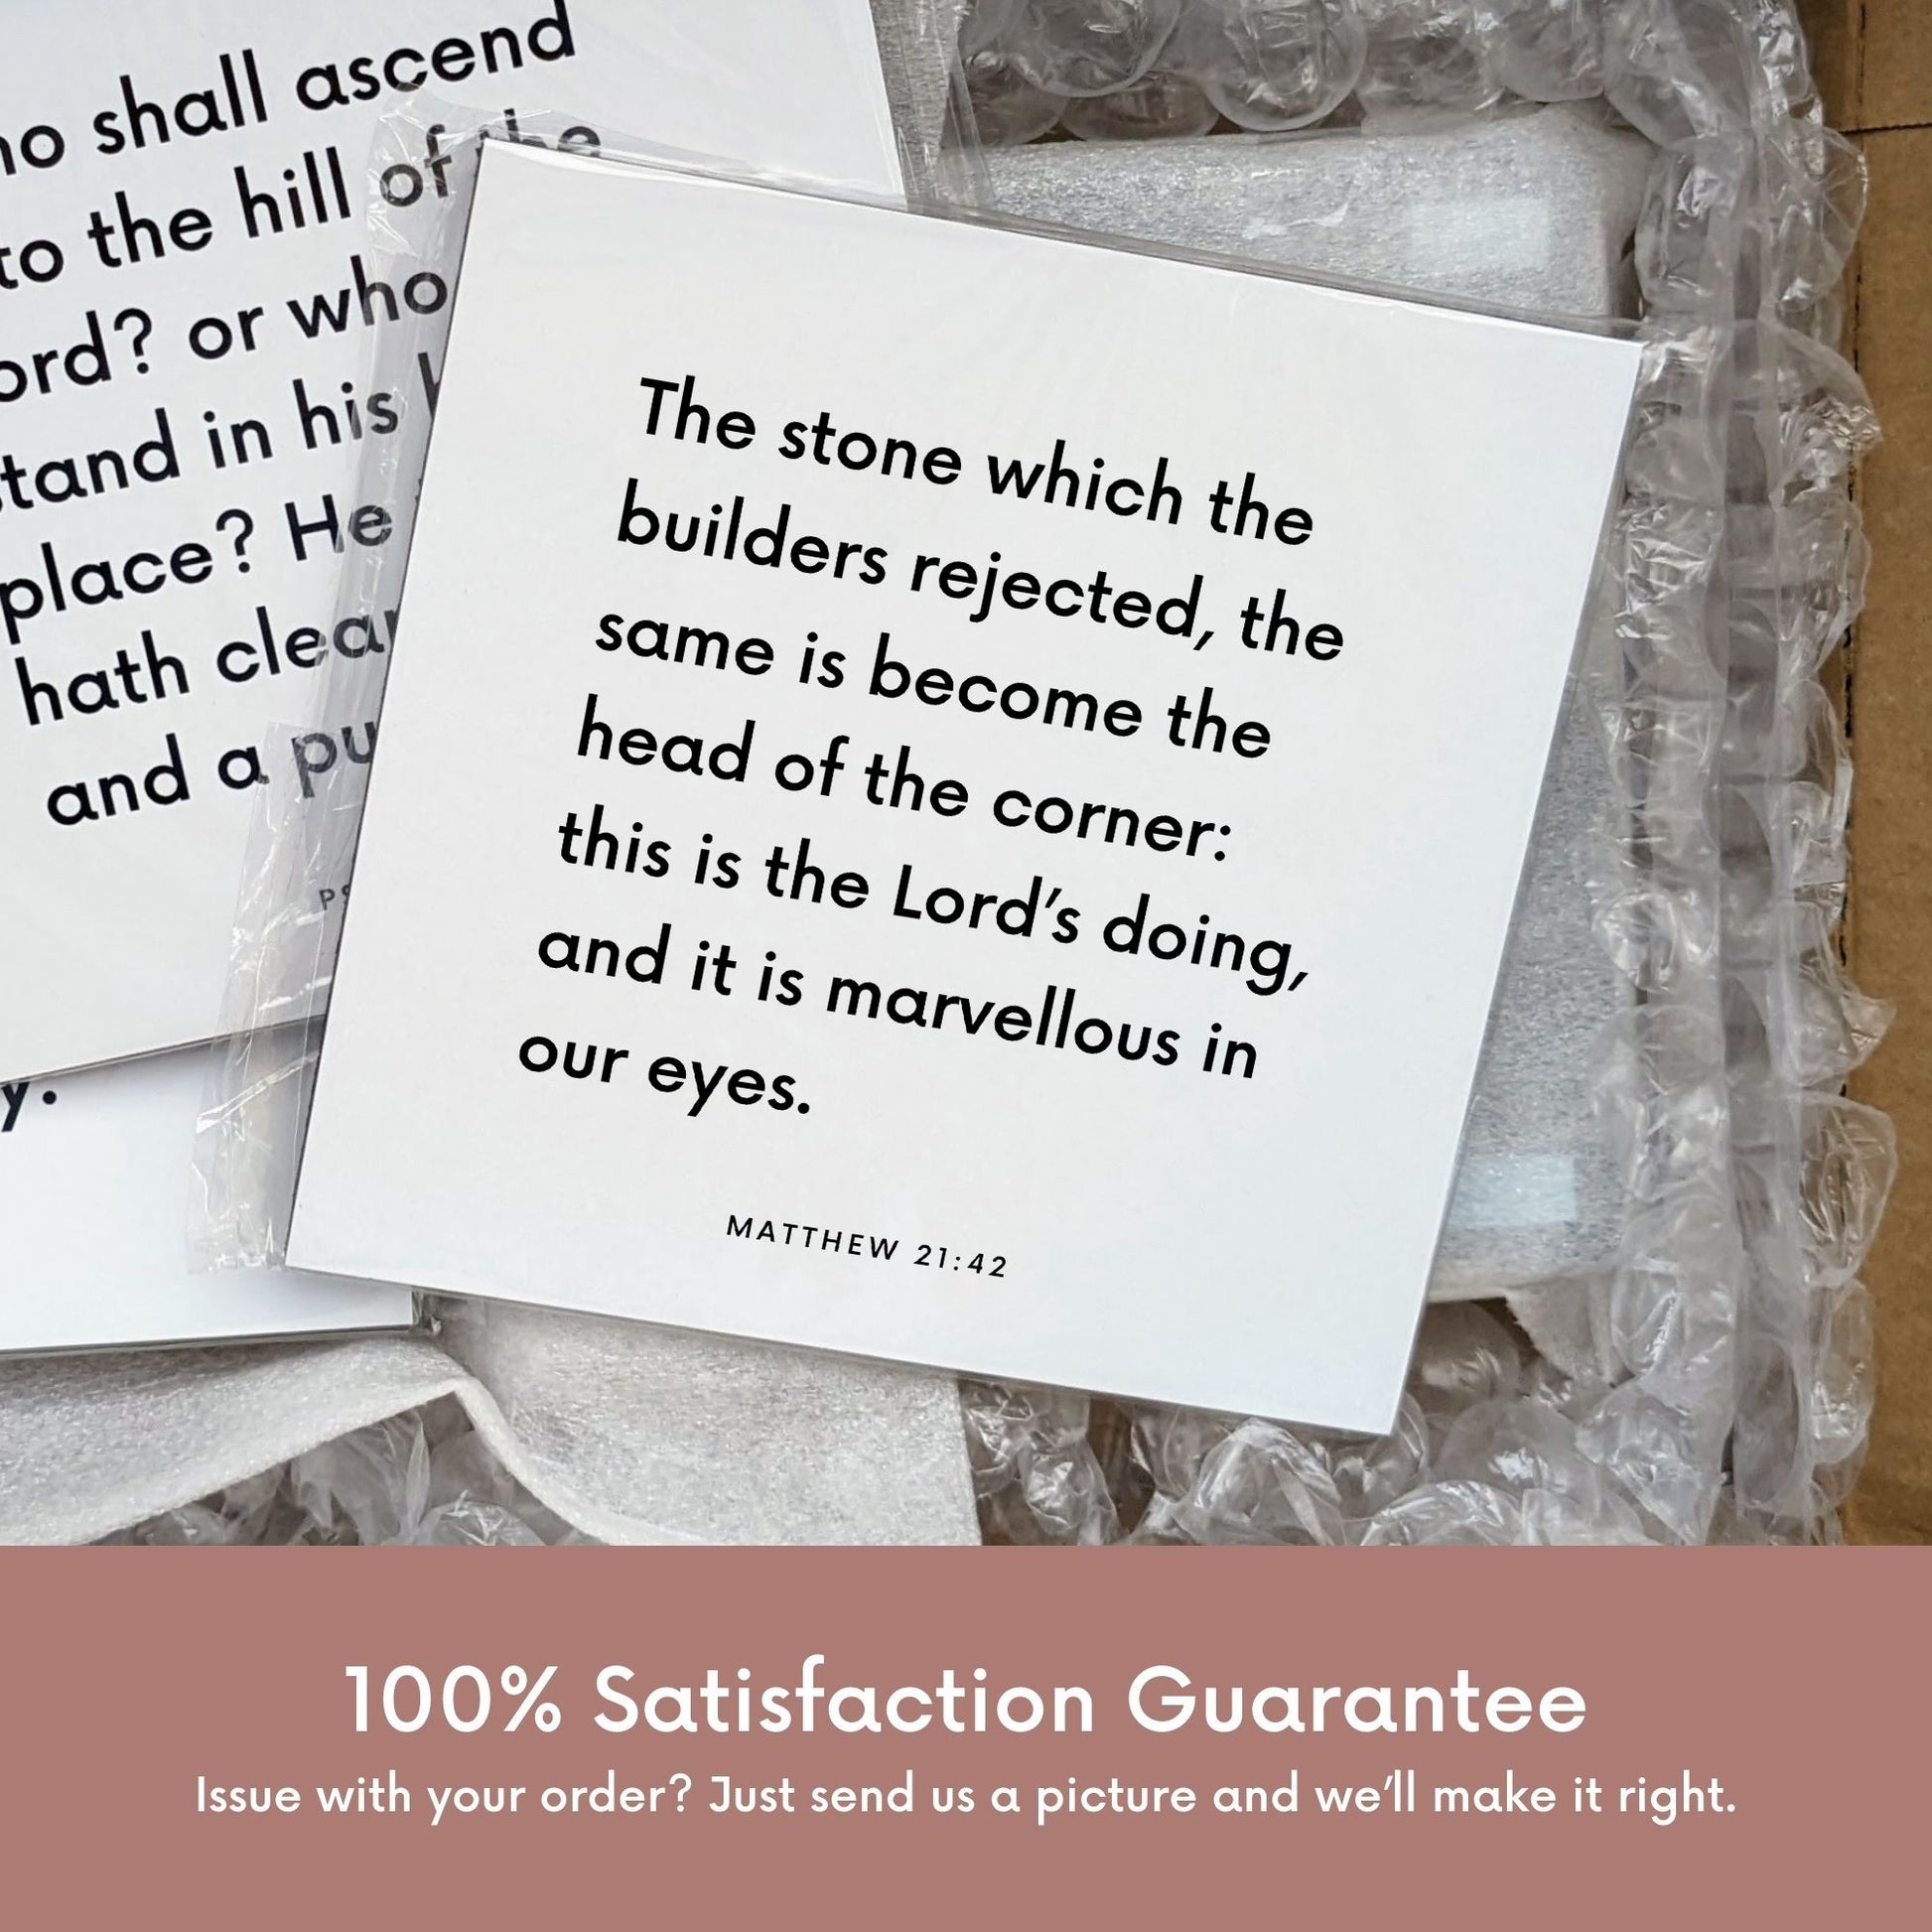 Shipping materials for scripture tile of Matthew 21:42 - "The stone which the builders rejected"